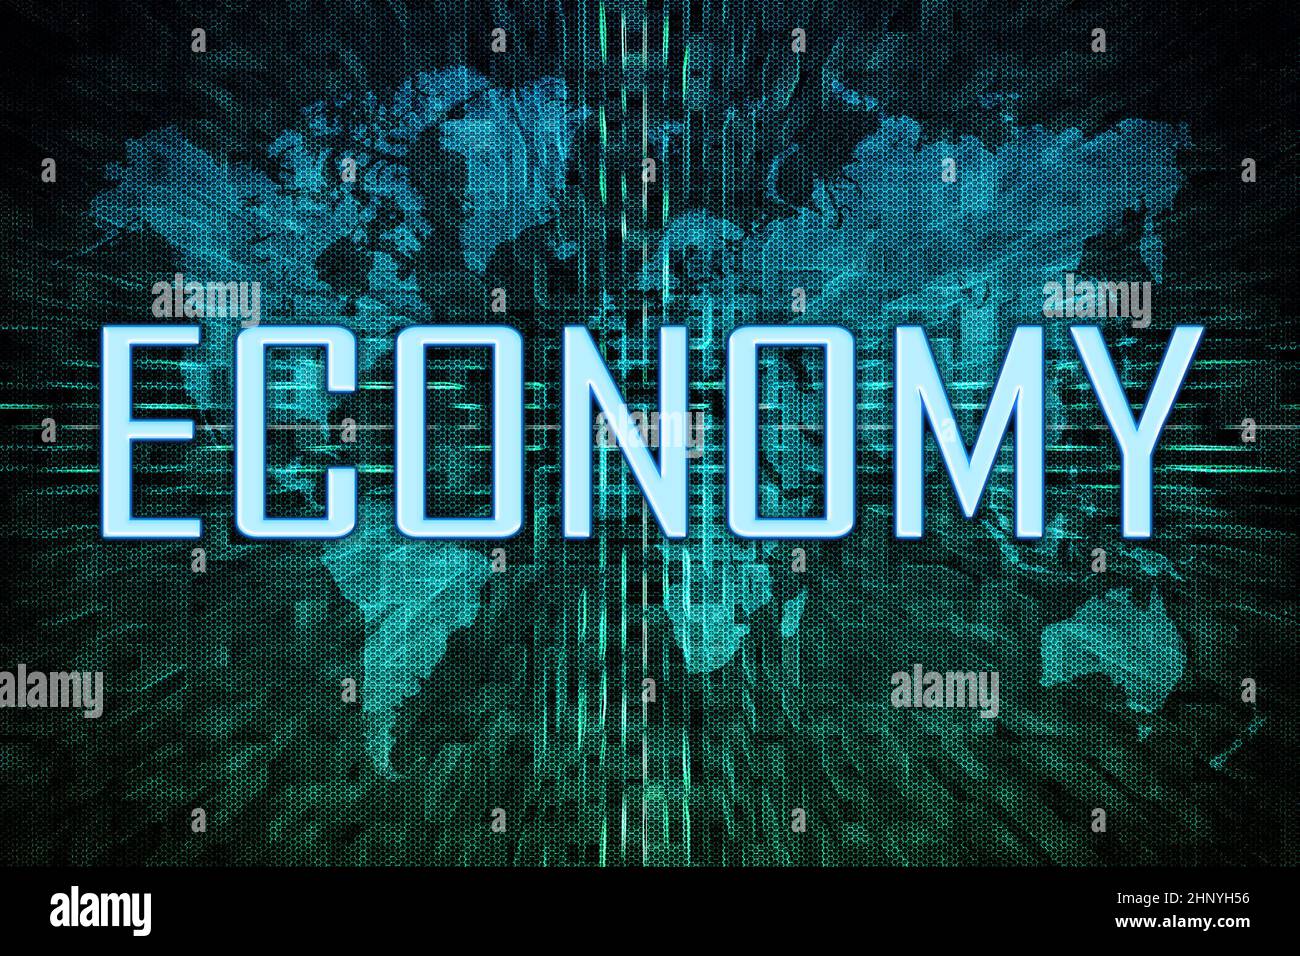 Economy - text concept on green digital world map background. Stock Photo